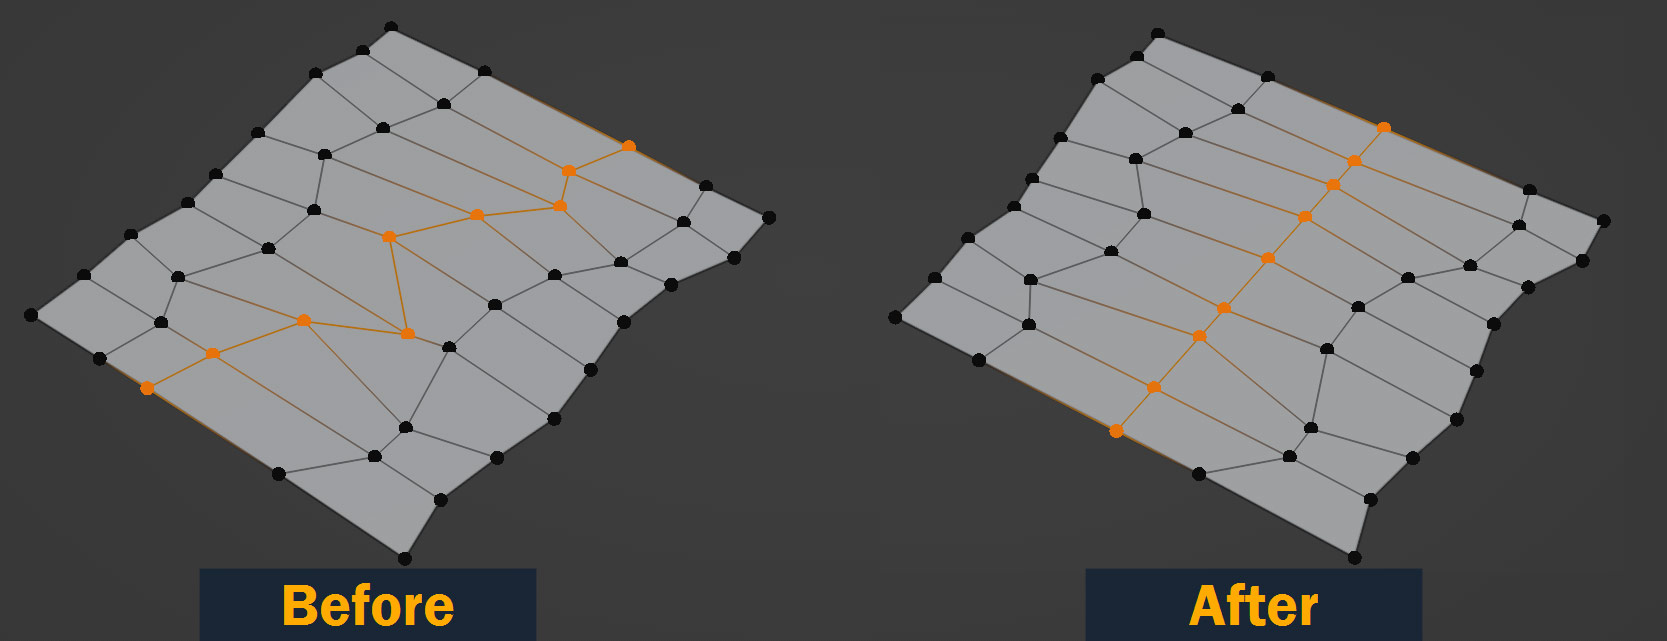 align vertices along an axis